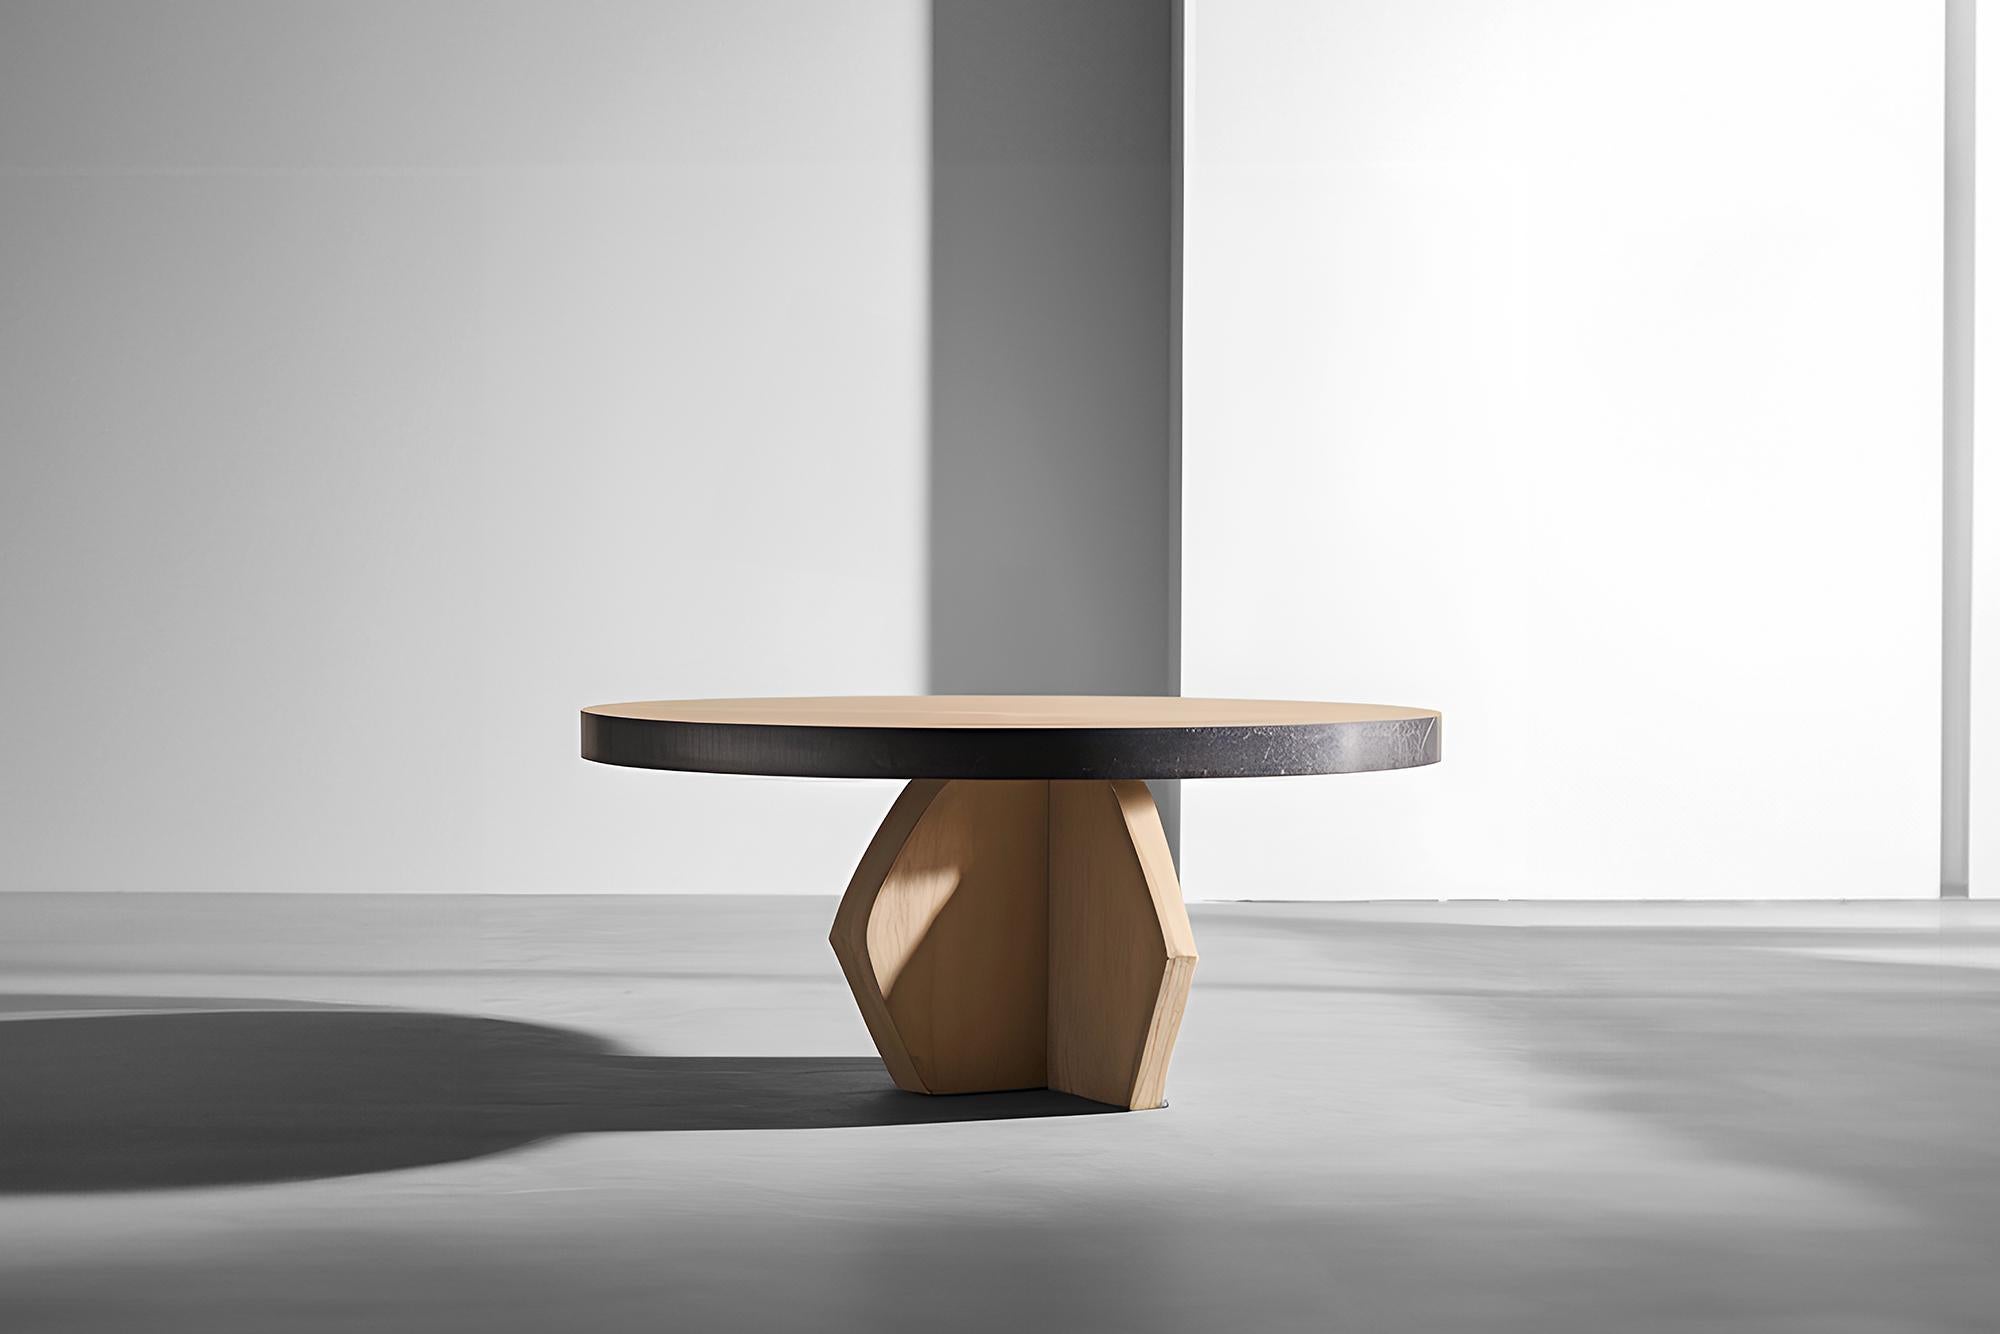 Fundamenta Coffee Table 55 Solid Oak, Abstract Design by NONO



Sculptural coffee table made of solid wood with a natural water-based or black tinted finish. Due to the nature of the production process, each piece may vary in grain, texture, shape